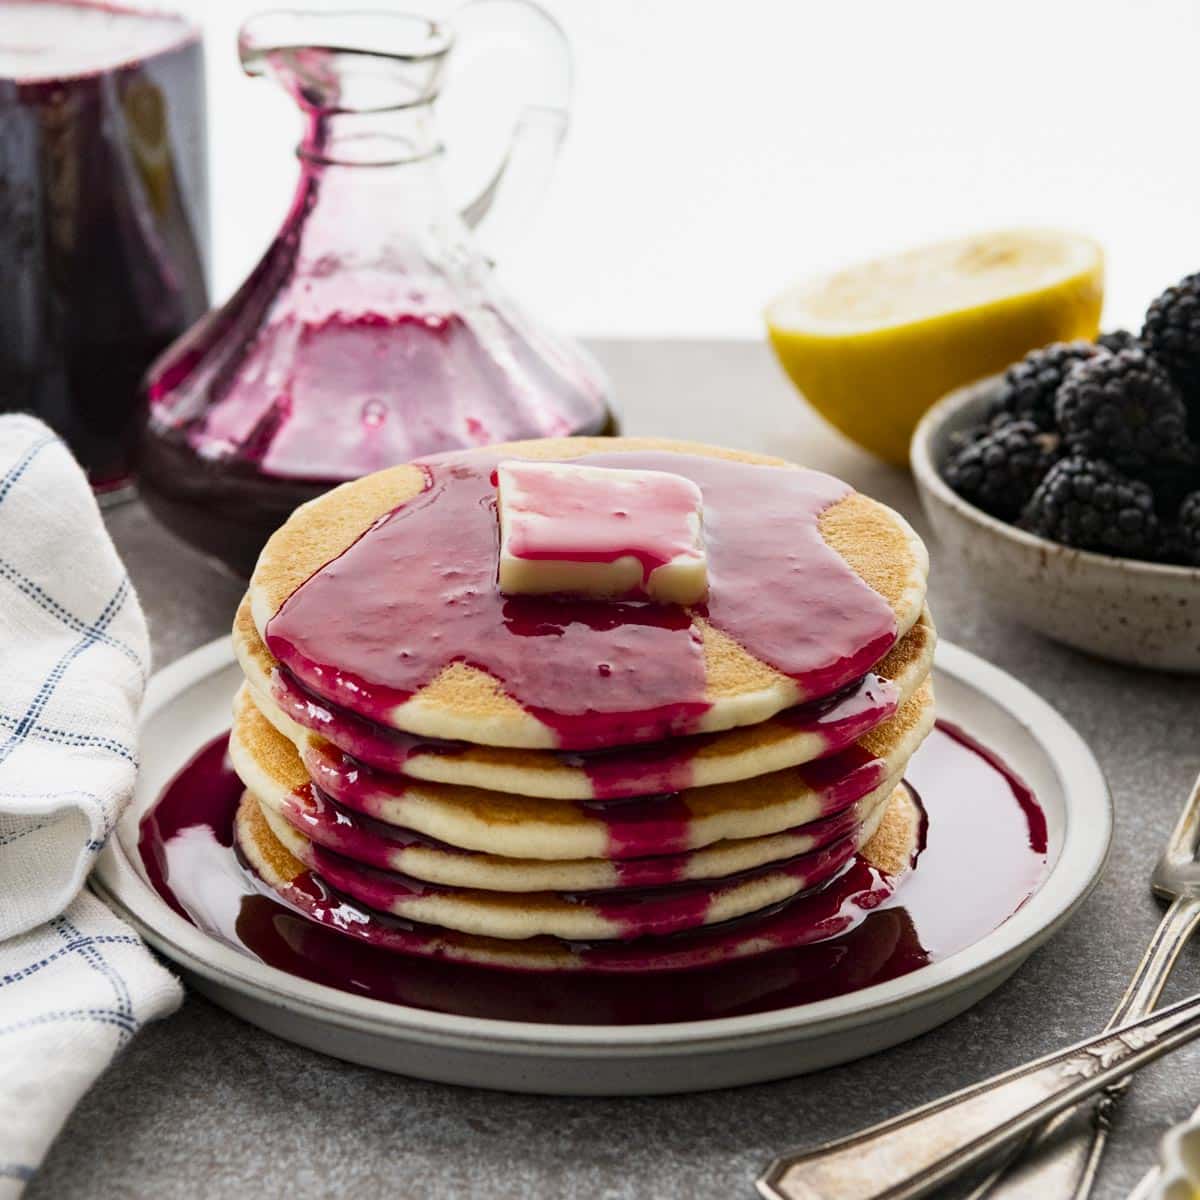 Square side shot of a stack of pancakes with blackberry syrup.